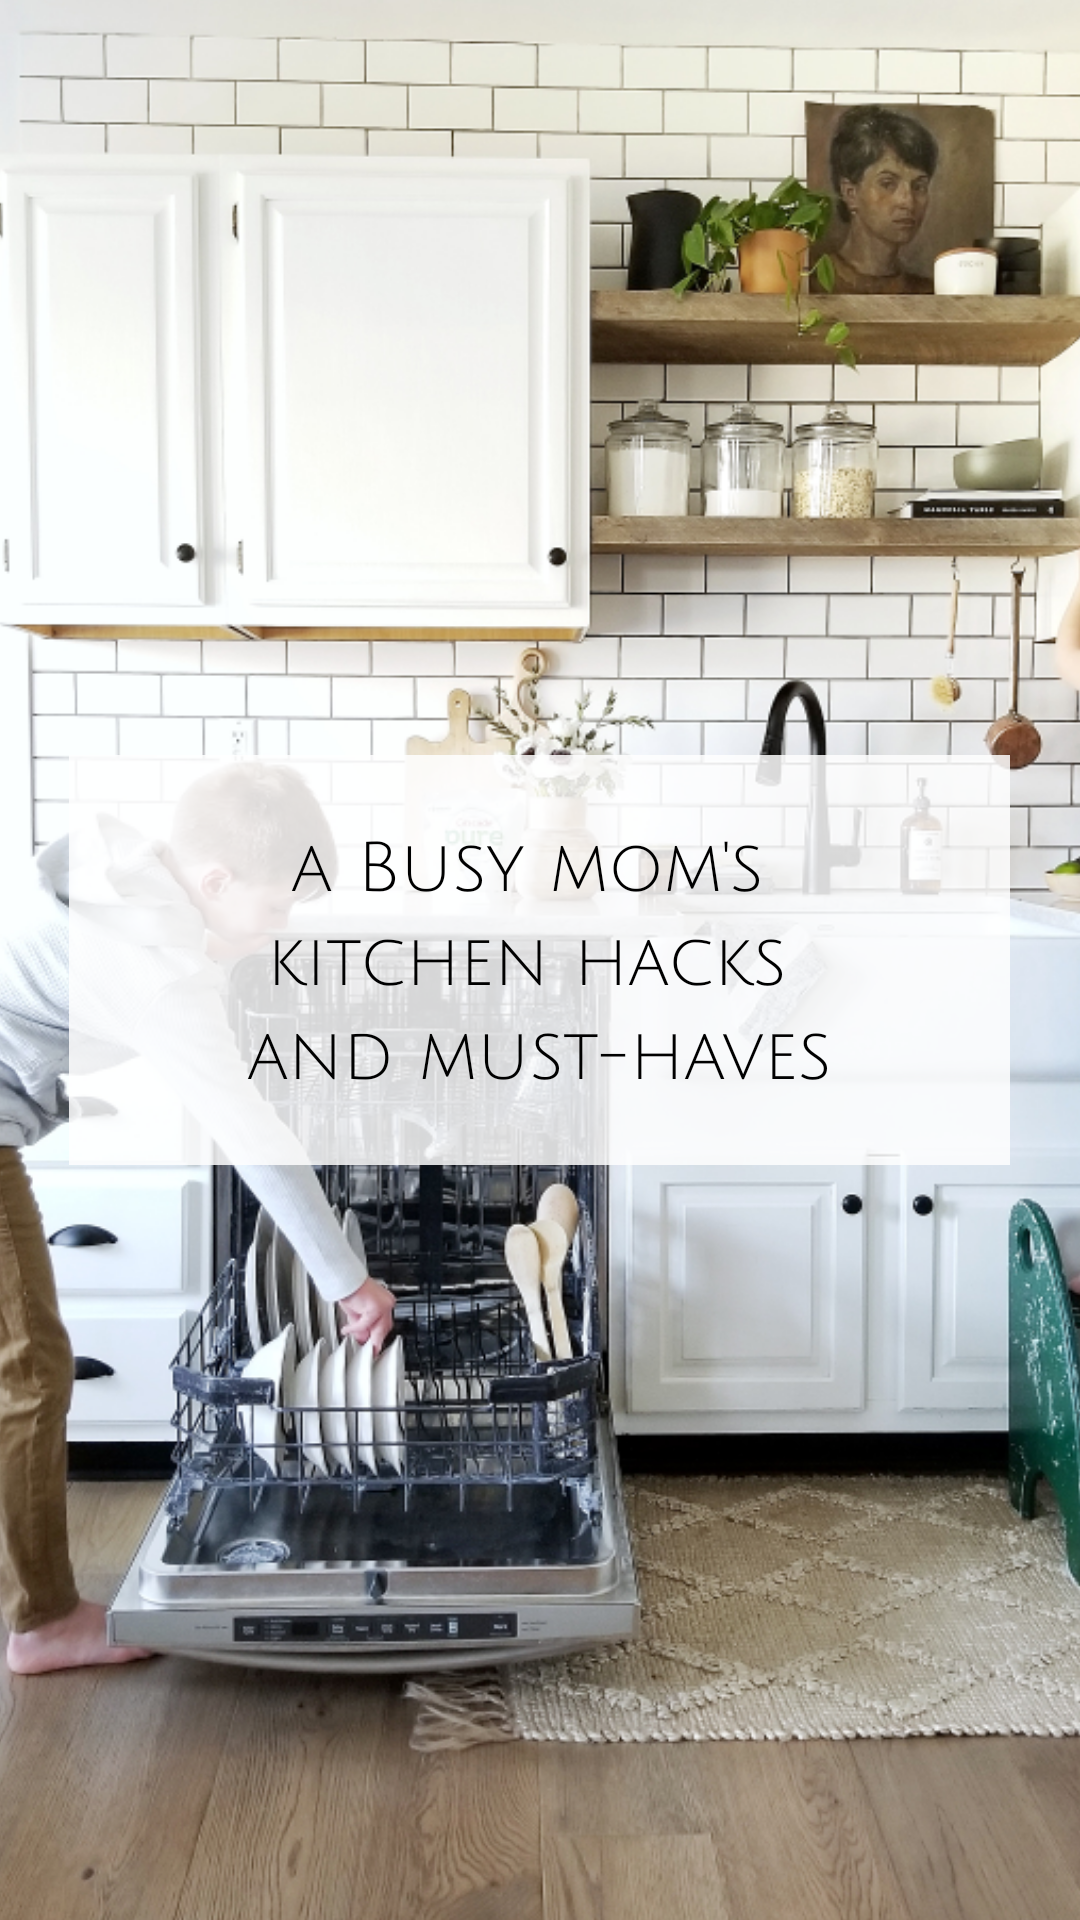 30 kitchen hacks for busy moms: Cooking Made Simple